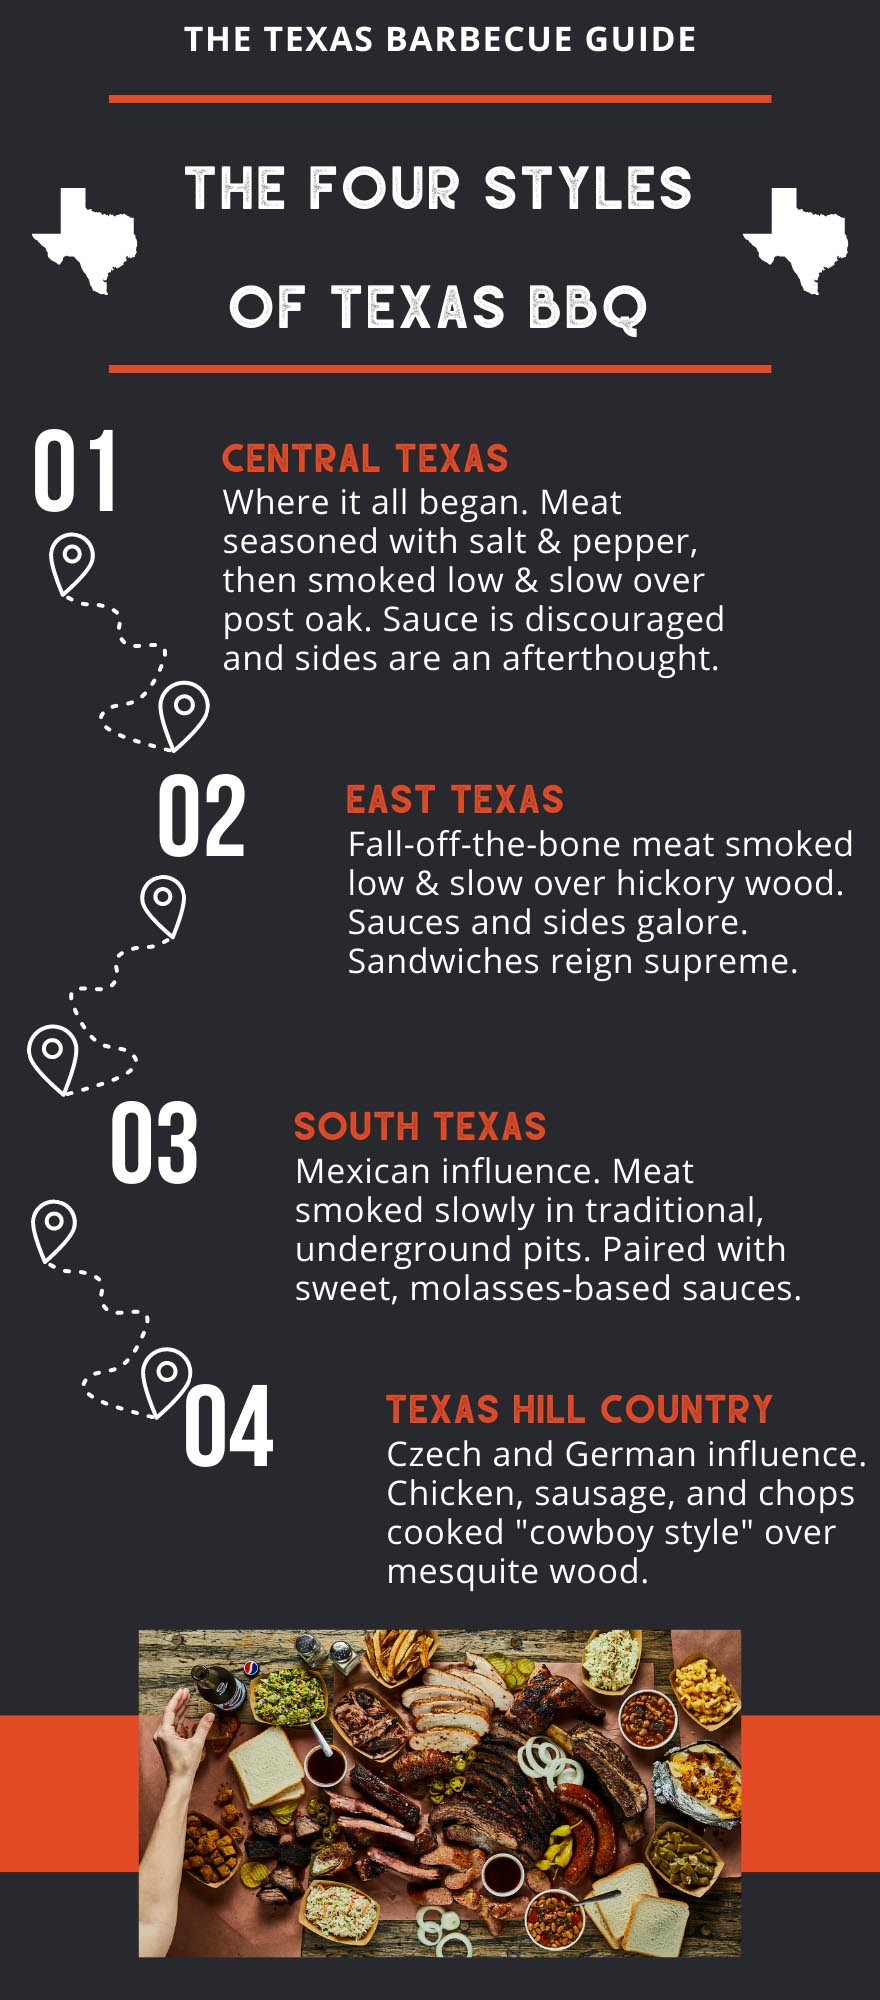 The four styles of Texas BBQ infographic